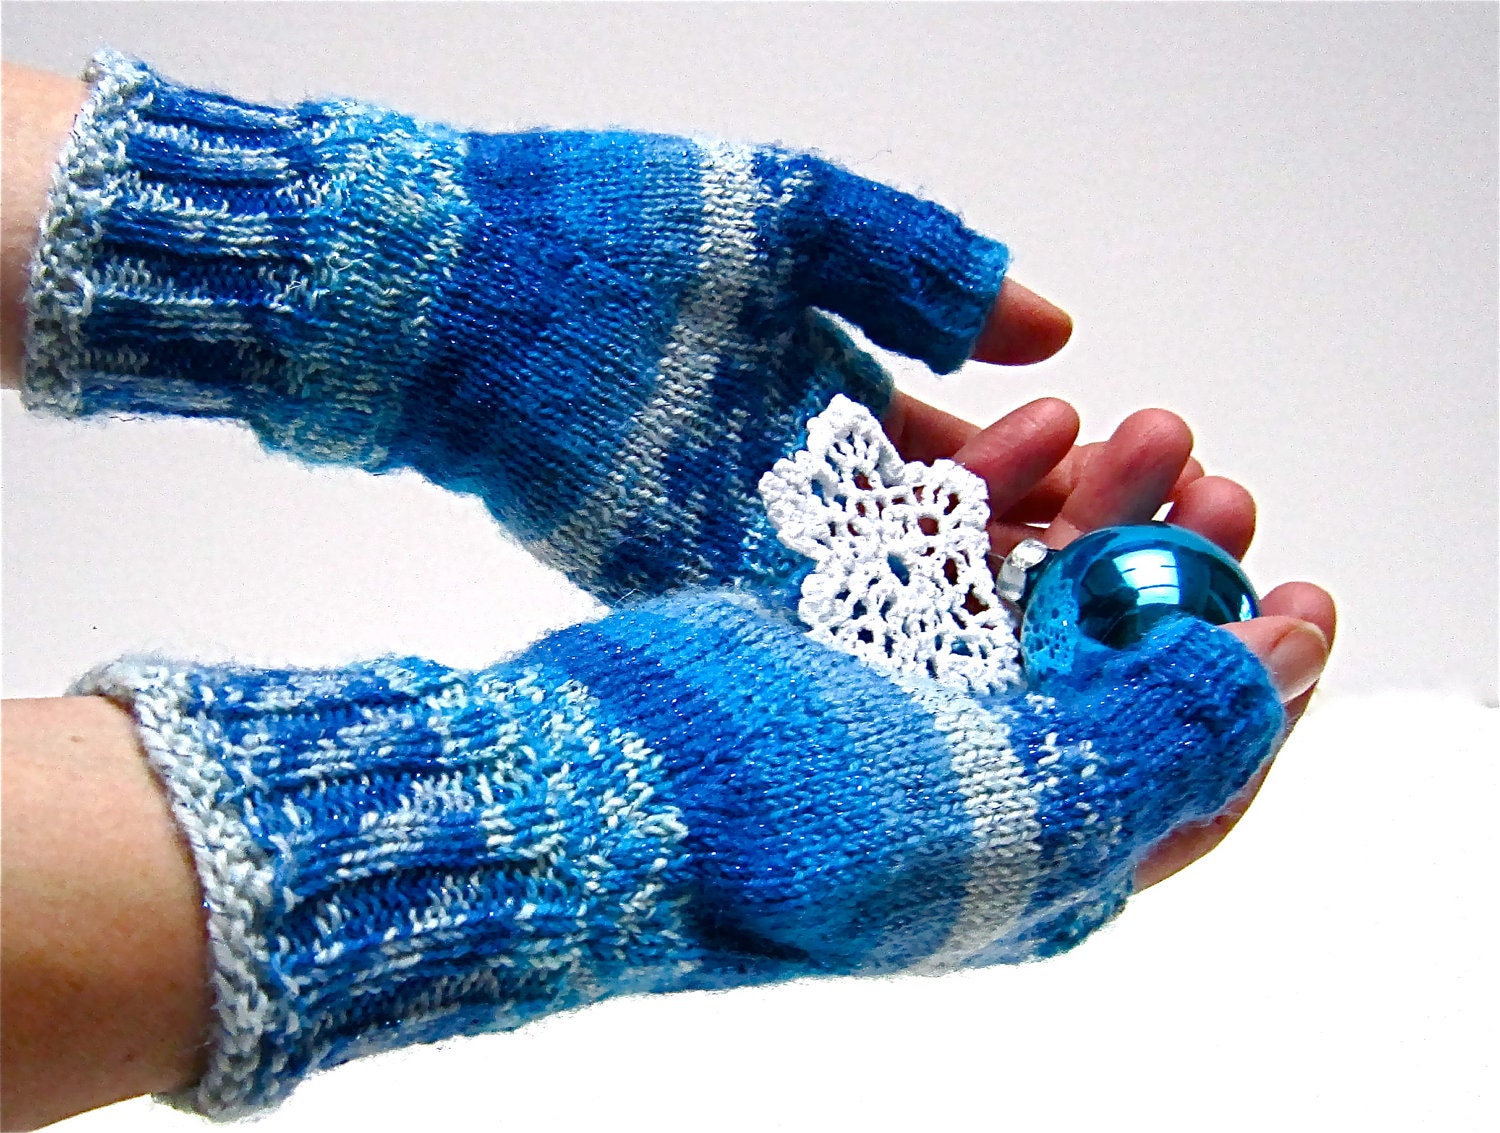 Fingerless Gloves 'Jack Frost' Faire Isle Ice Blue White Texting Mitts Gauntlets Wrist Warmers wool. MADE TO ORDER - JanetLongArts